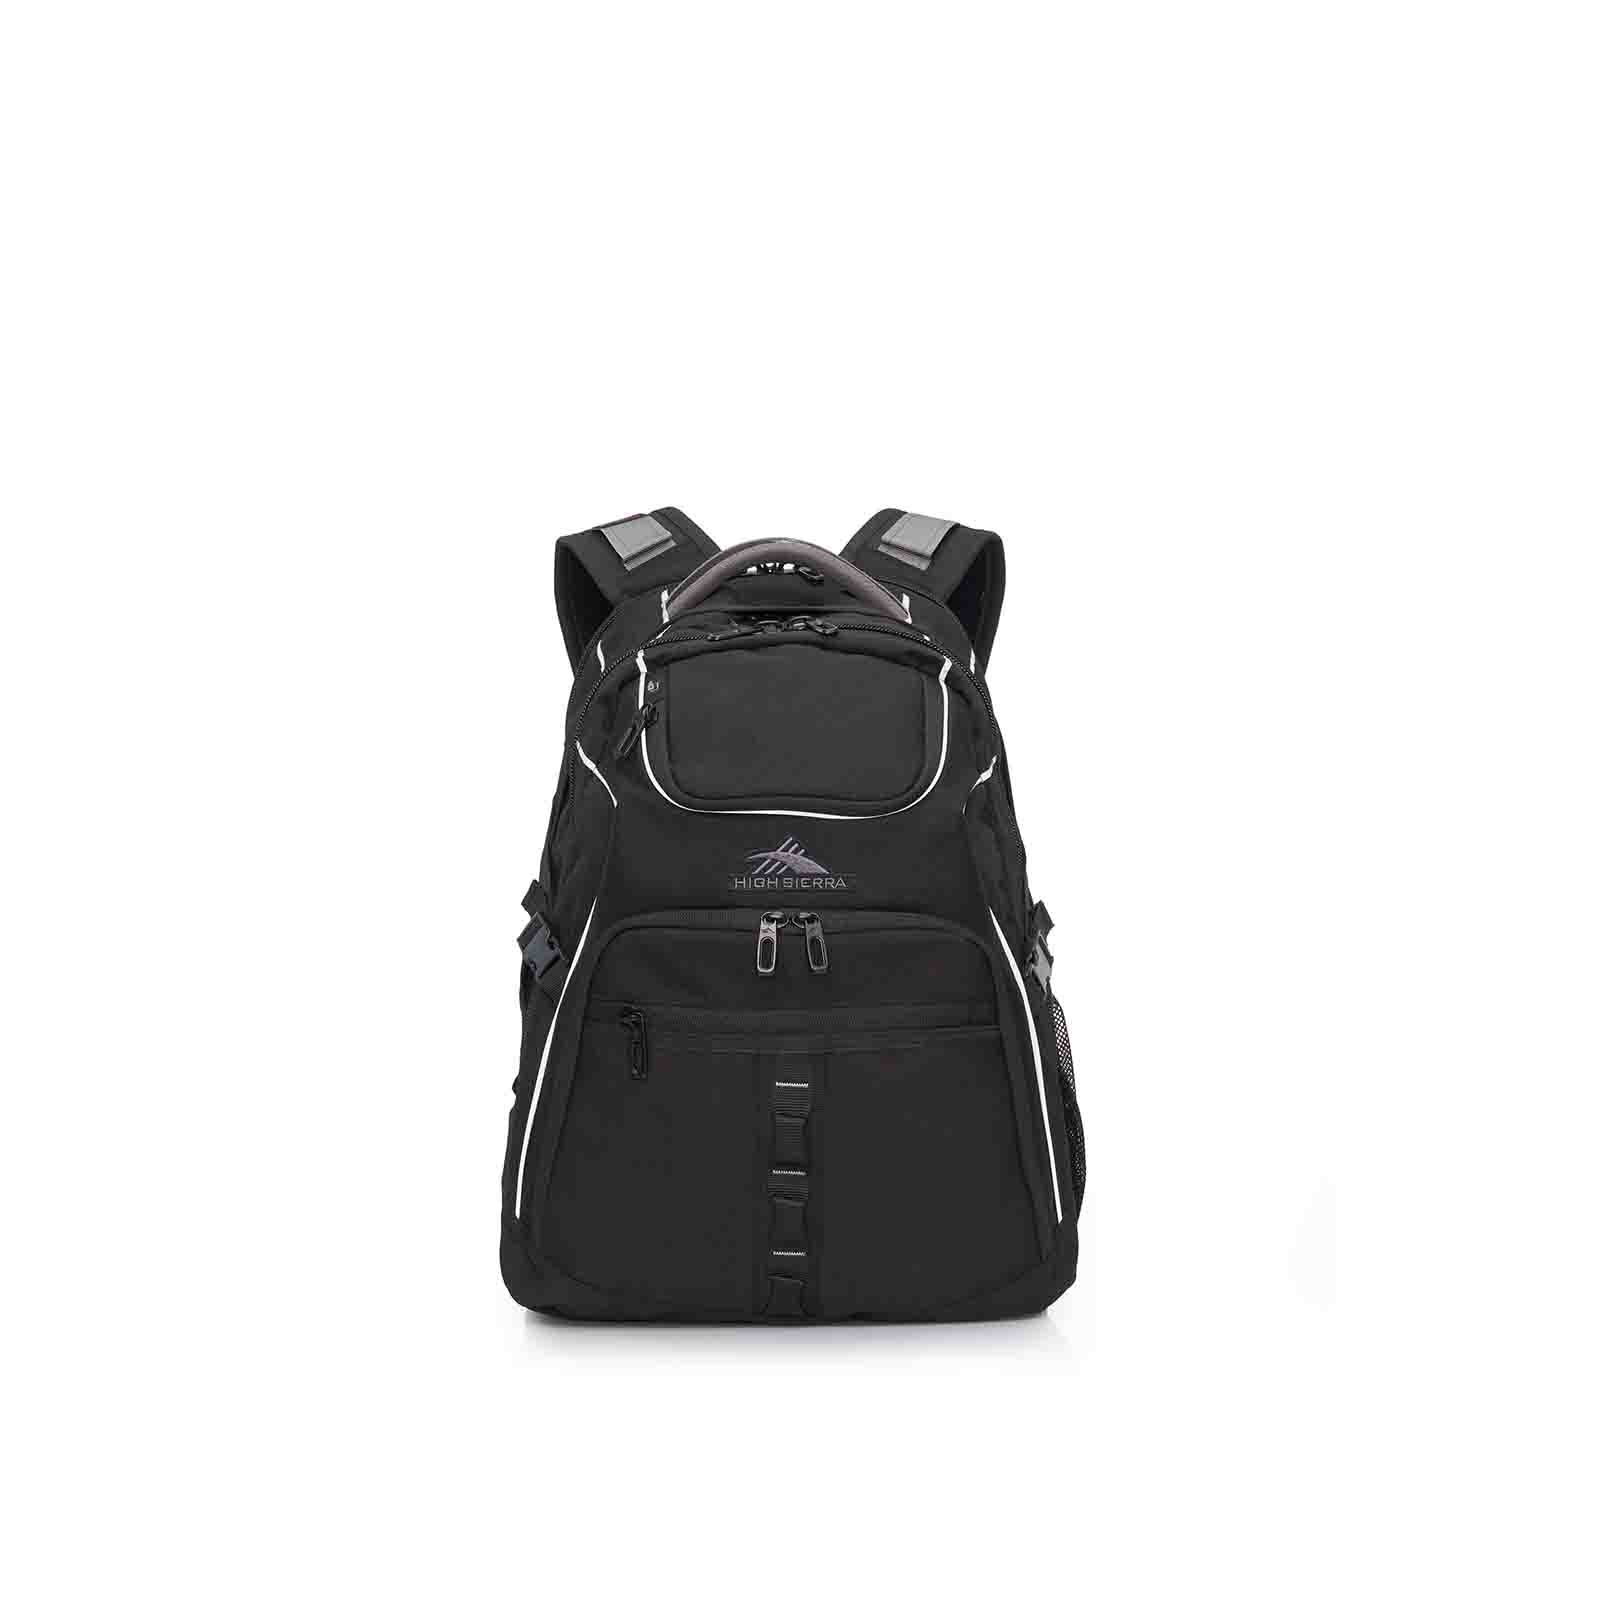 High-Sierra-Access-3-Eco-16-Inch-Laptop-Backpack-Black-Front